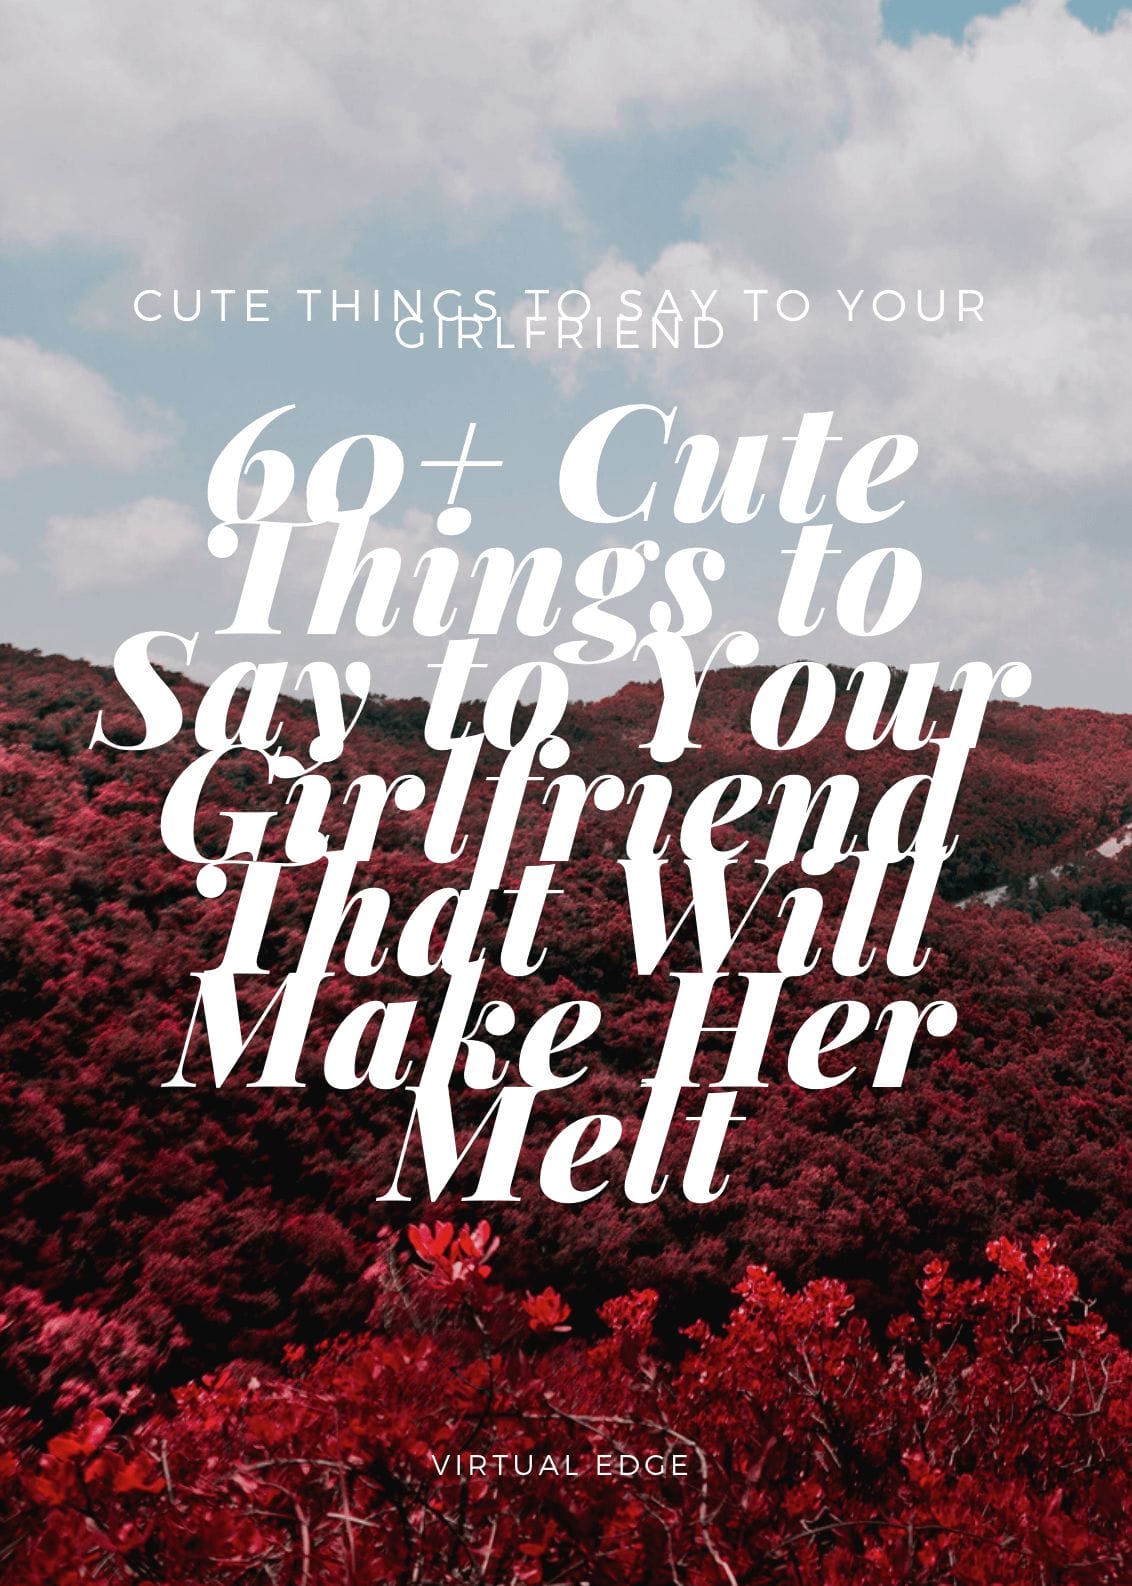 Really cute things to say to your girlfriend